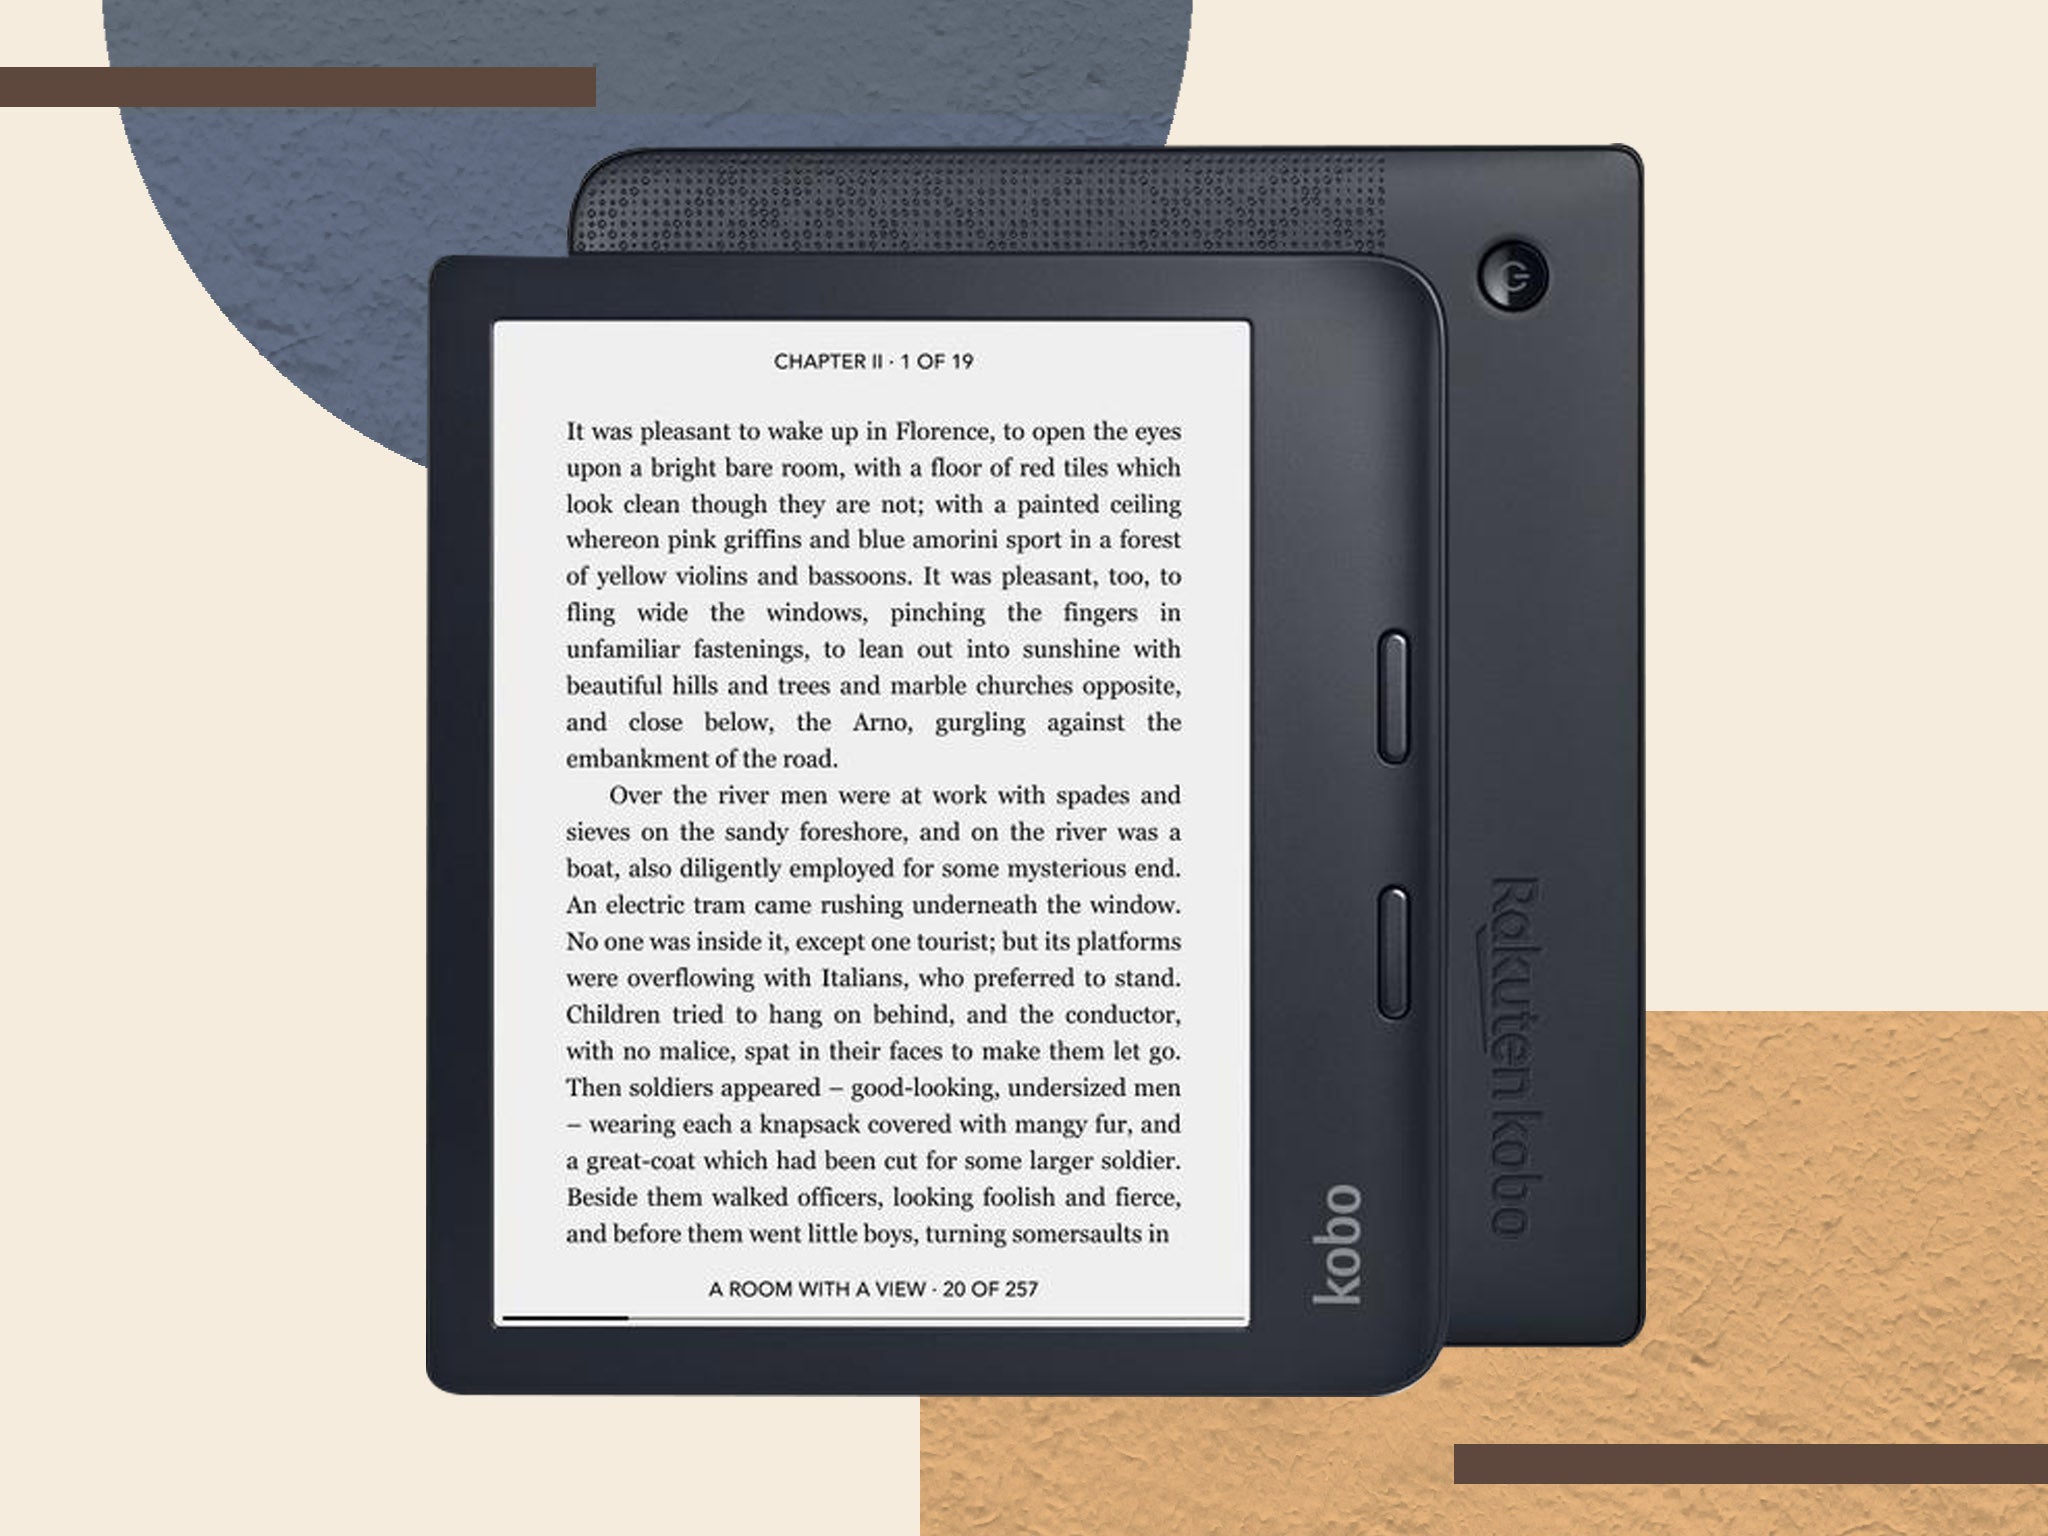 Kobo libra 2 review: Release date, e-reader size, features and